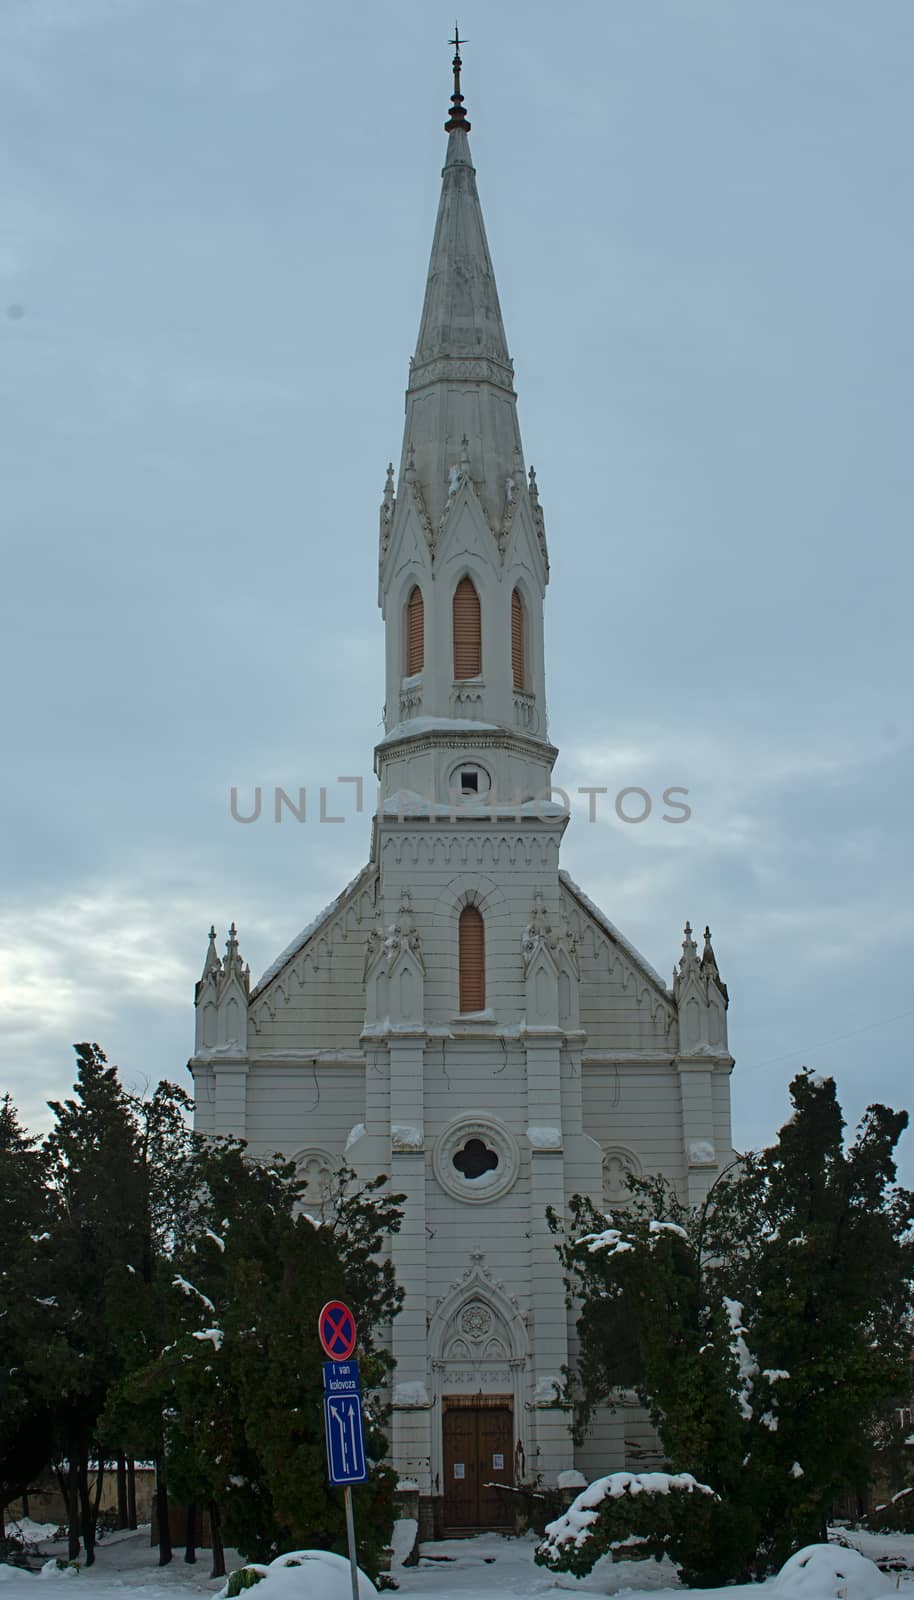 The Reformed Church is a Protestant denomination church in Zrenjanin, Serbia. It was built in 1891.